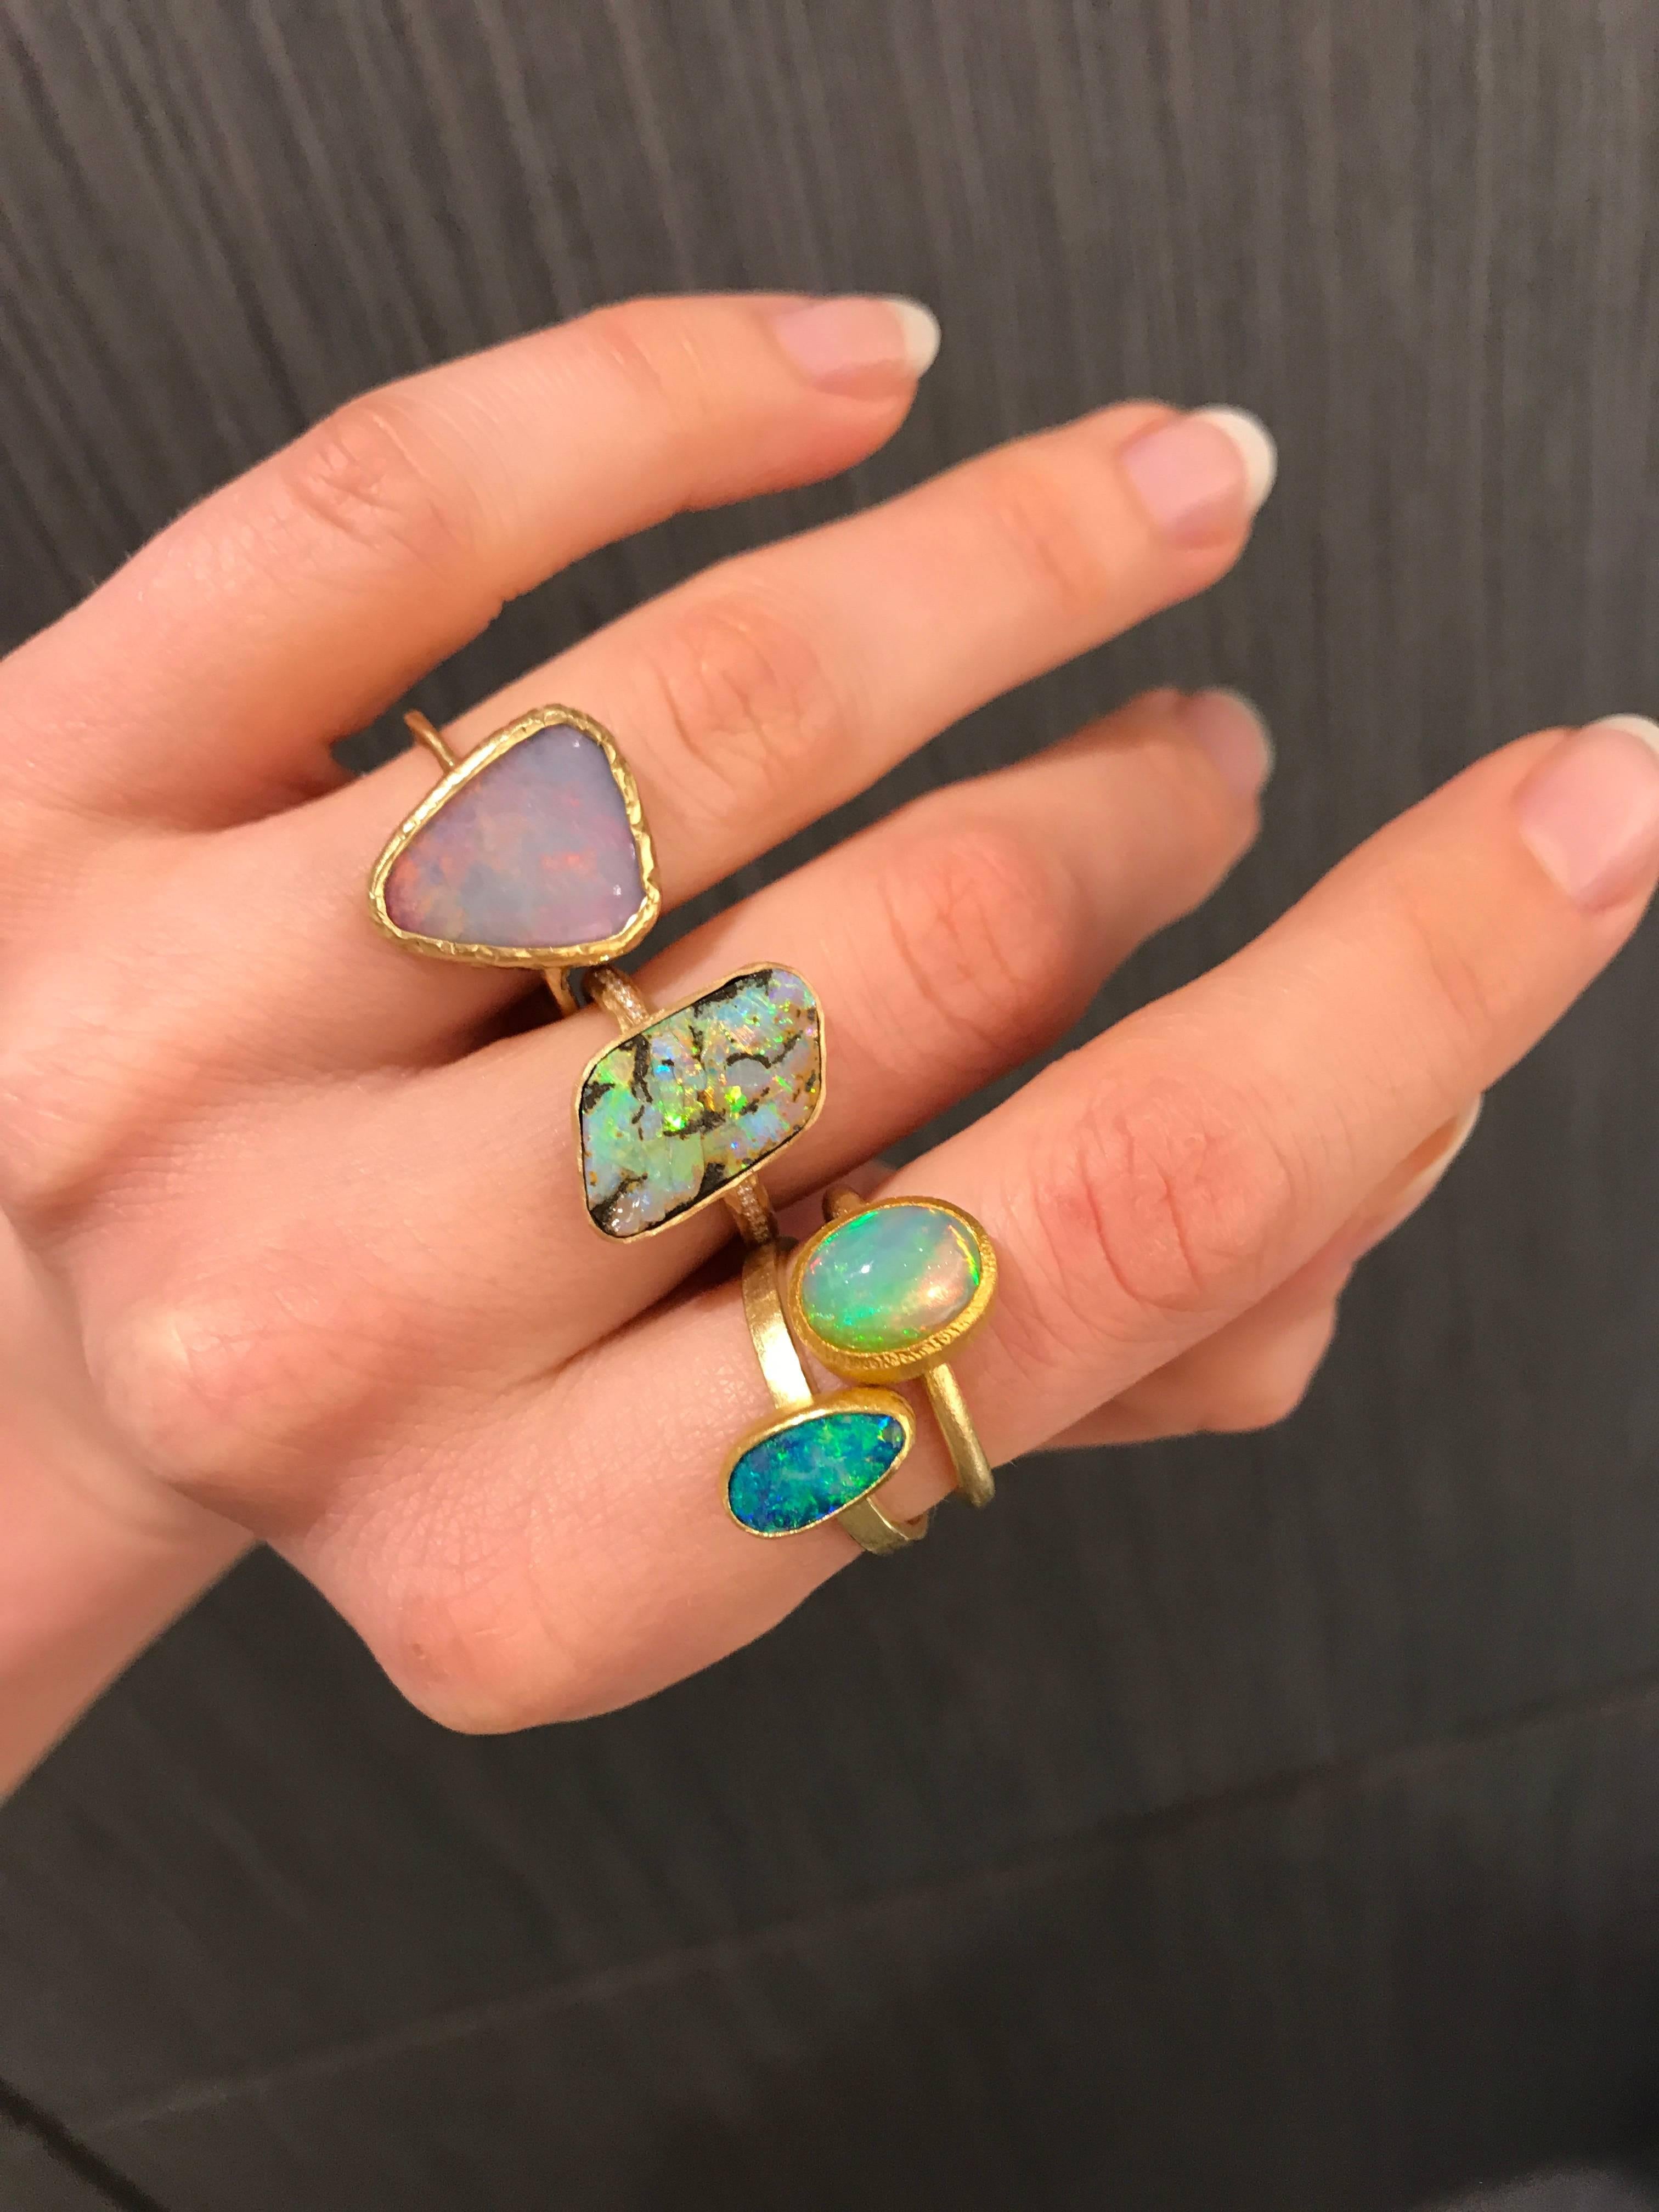 One of a Kind Ring by jewelry designer Page Sargisson handmade in 18k yellow gold featuring a truly special Austalian boulder opal in a unique violet hue with an intense primary orange and red flash and additional color flashes of blue, green,